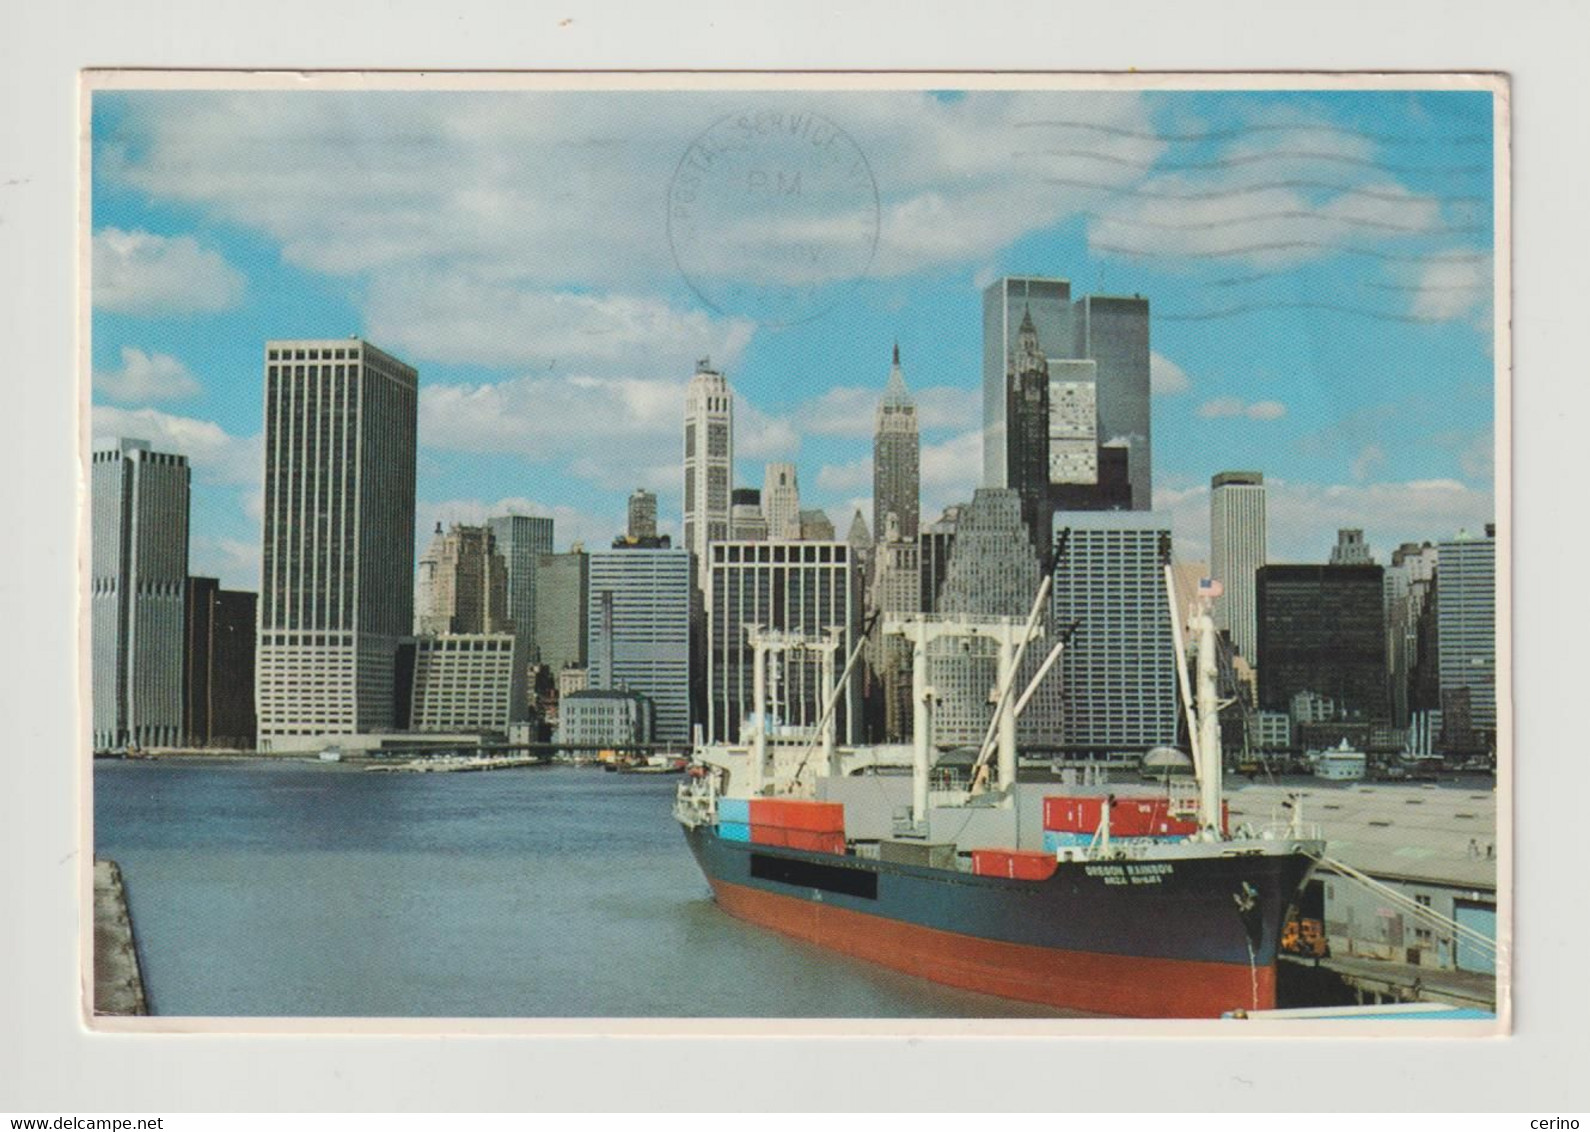 NEW  YORK  CITY:  OCEAN  FREIGHTER  DOCKED  AT  A  BROOKLYN  PIER ...-  STAMP  REMOVED  -  TO  ITALY  -  FG - Brücken Und Tunnel